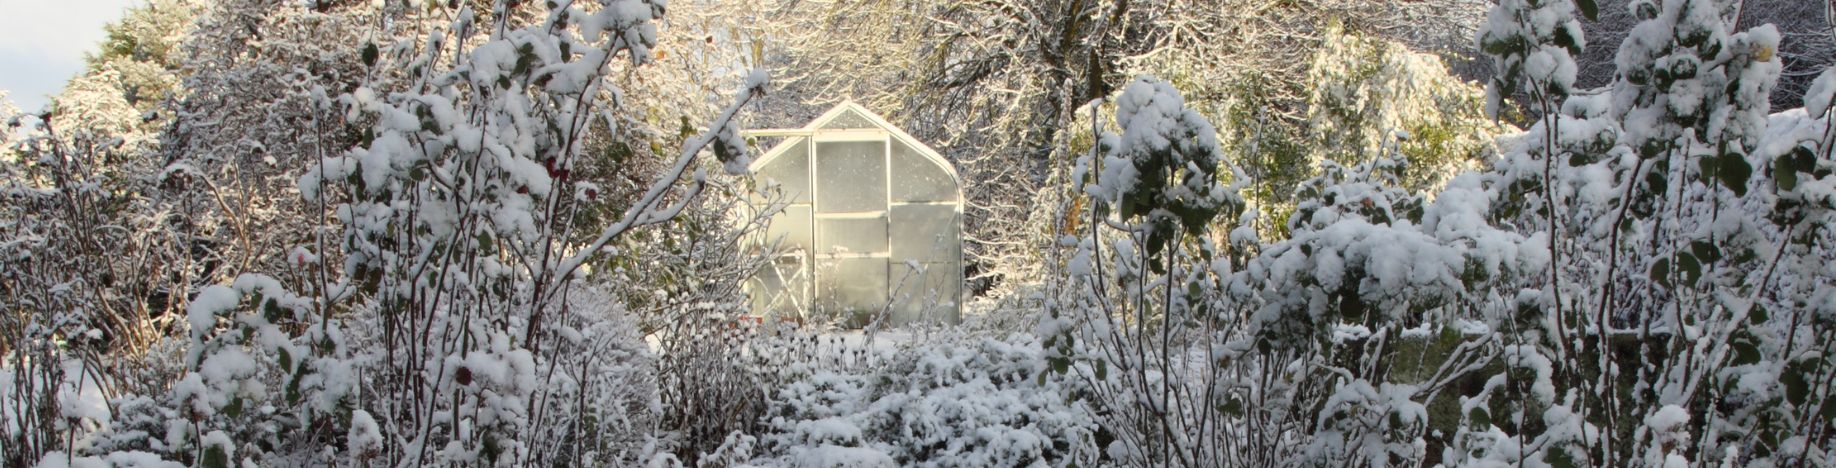 greenhouse with snow